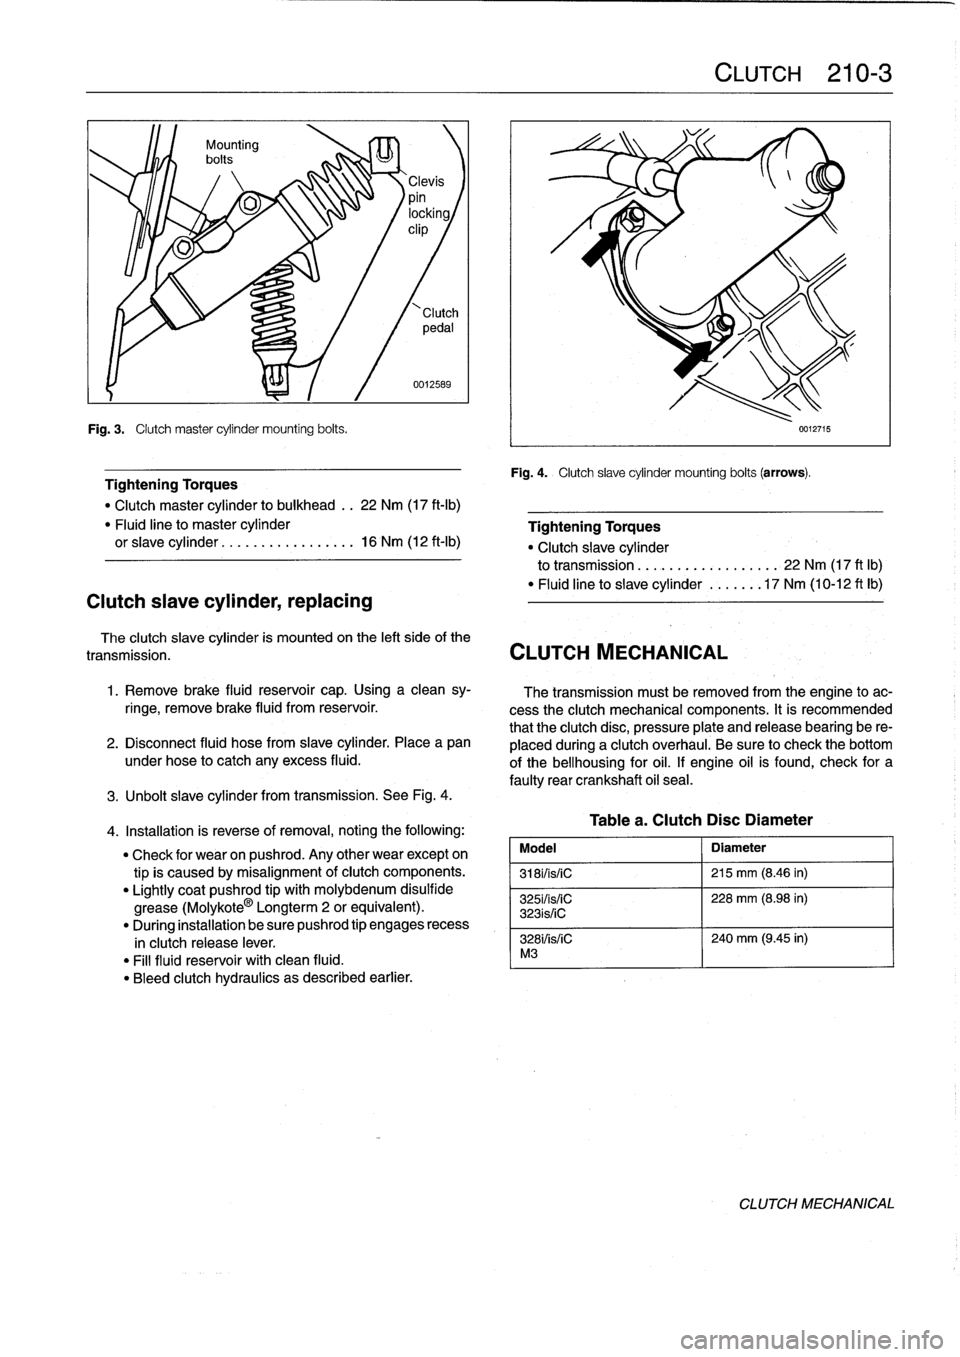 BMW 323i 1995 E36 User Guide Fig
.
3
.

	

Clutch
master
cylinder
mounting
bolts
.

Clutch
slave
cylinder,
replacing

0012589

Tightening
Torques

"
Clutch
master
cylinder
to
bulkhead
..
22
Nm
(17
ft-Ib)
"
Fluid
line
to
master
cy